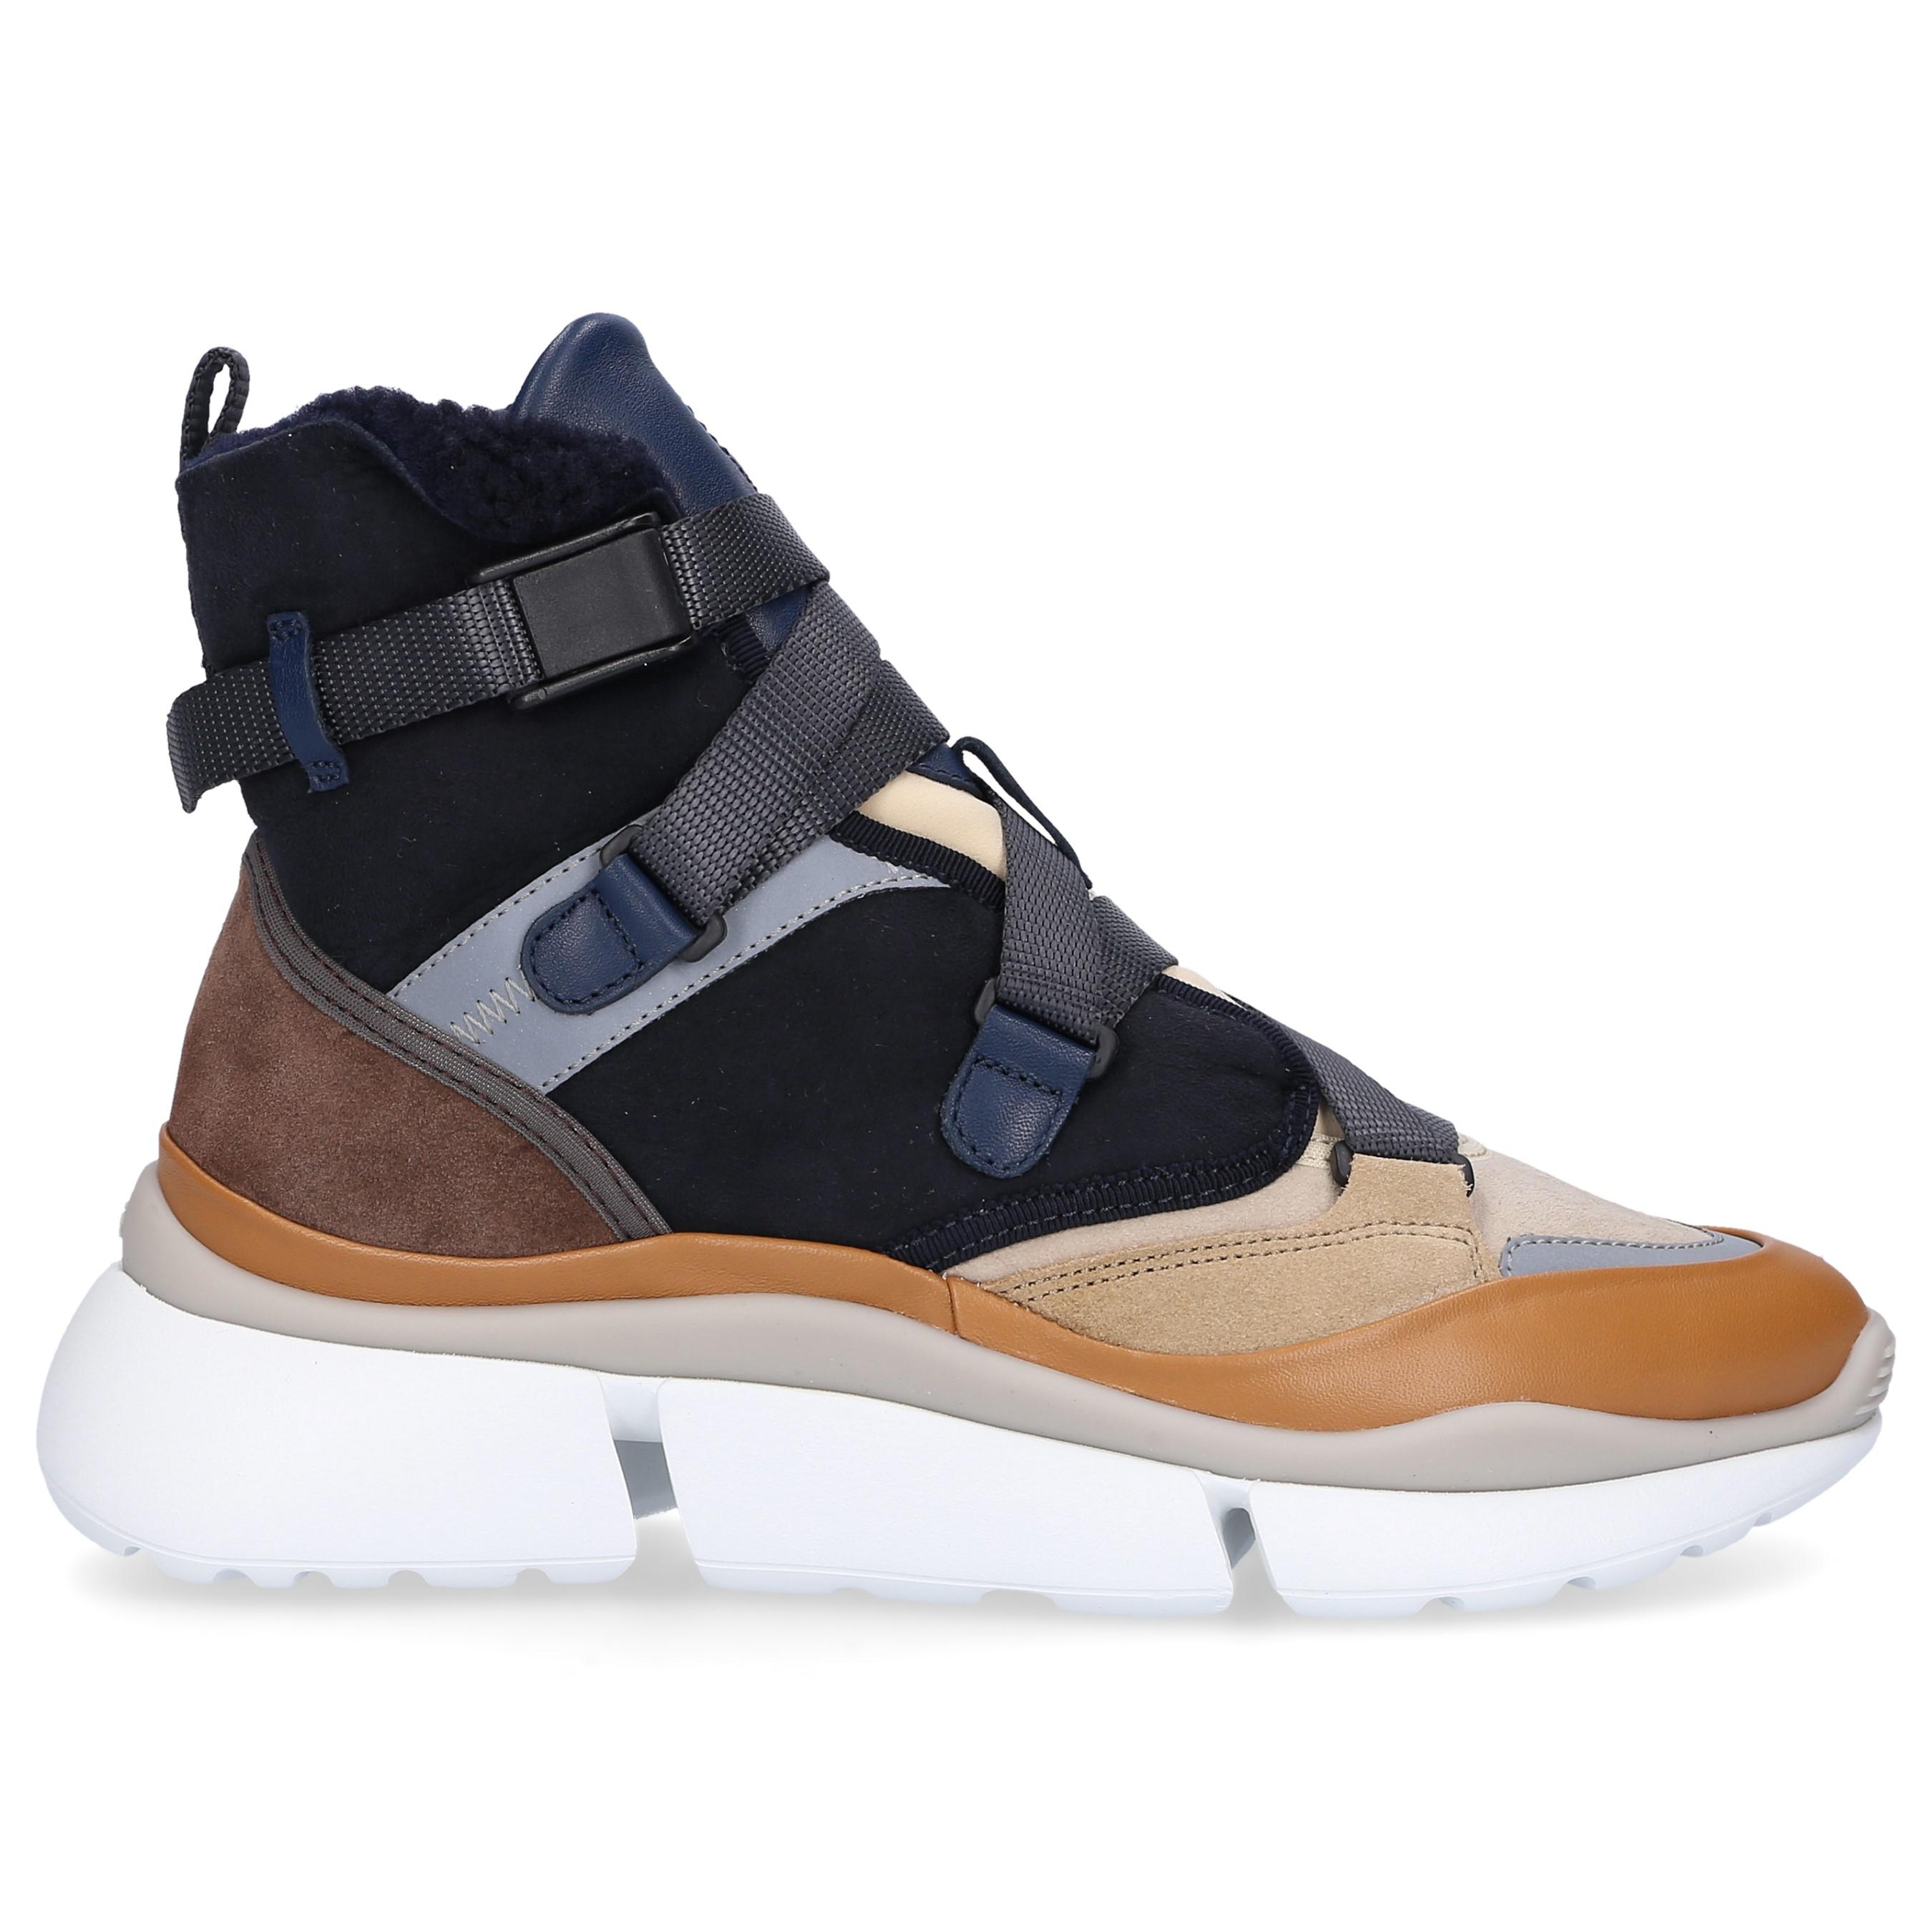 Chloé Leather High-top Sneakers Sonnie High in Beige,Blue (Blue) - Lyst